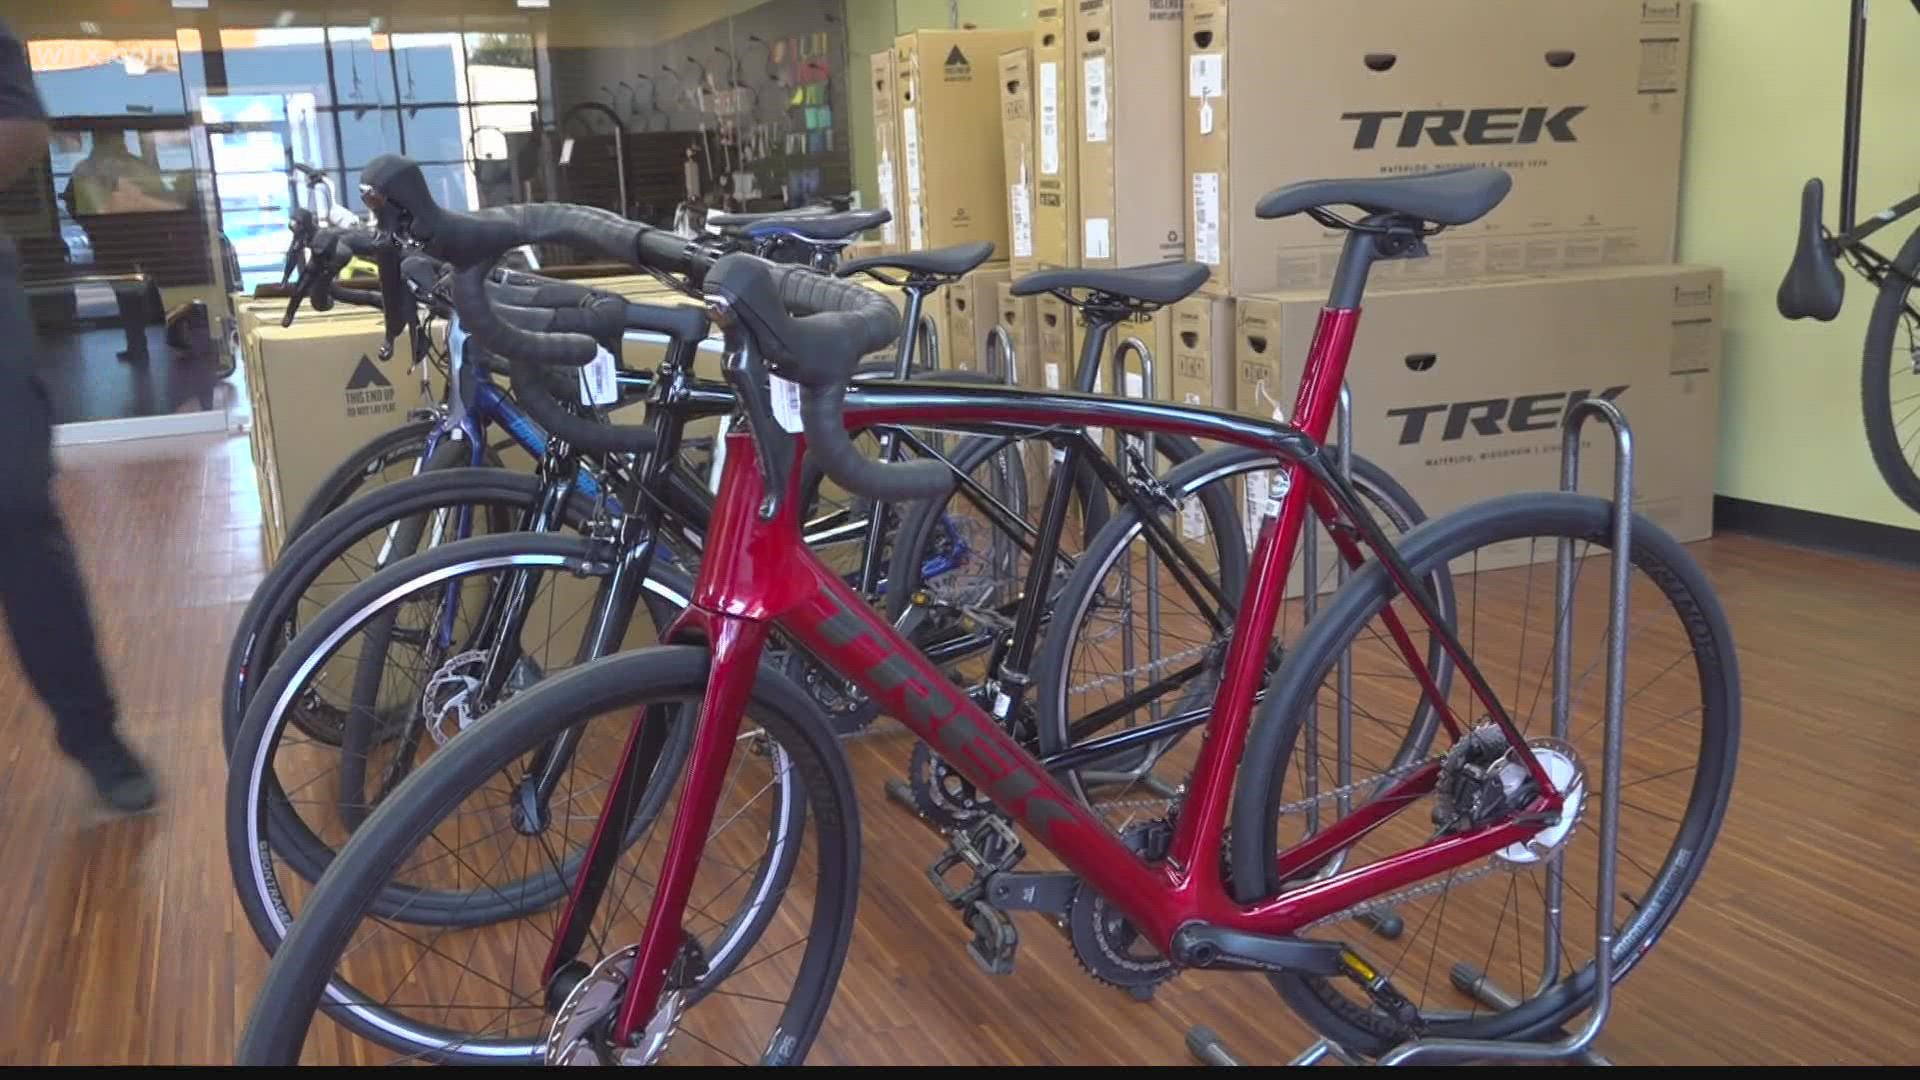 Some models of bicycles are taking months to get to retailers.